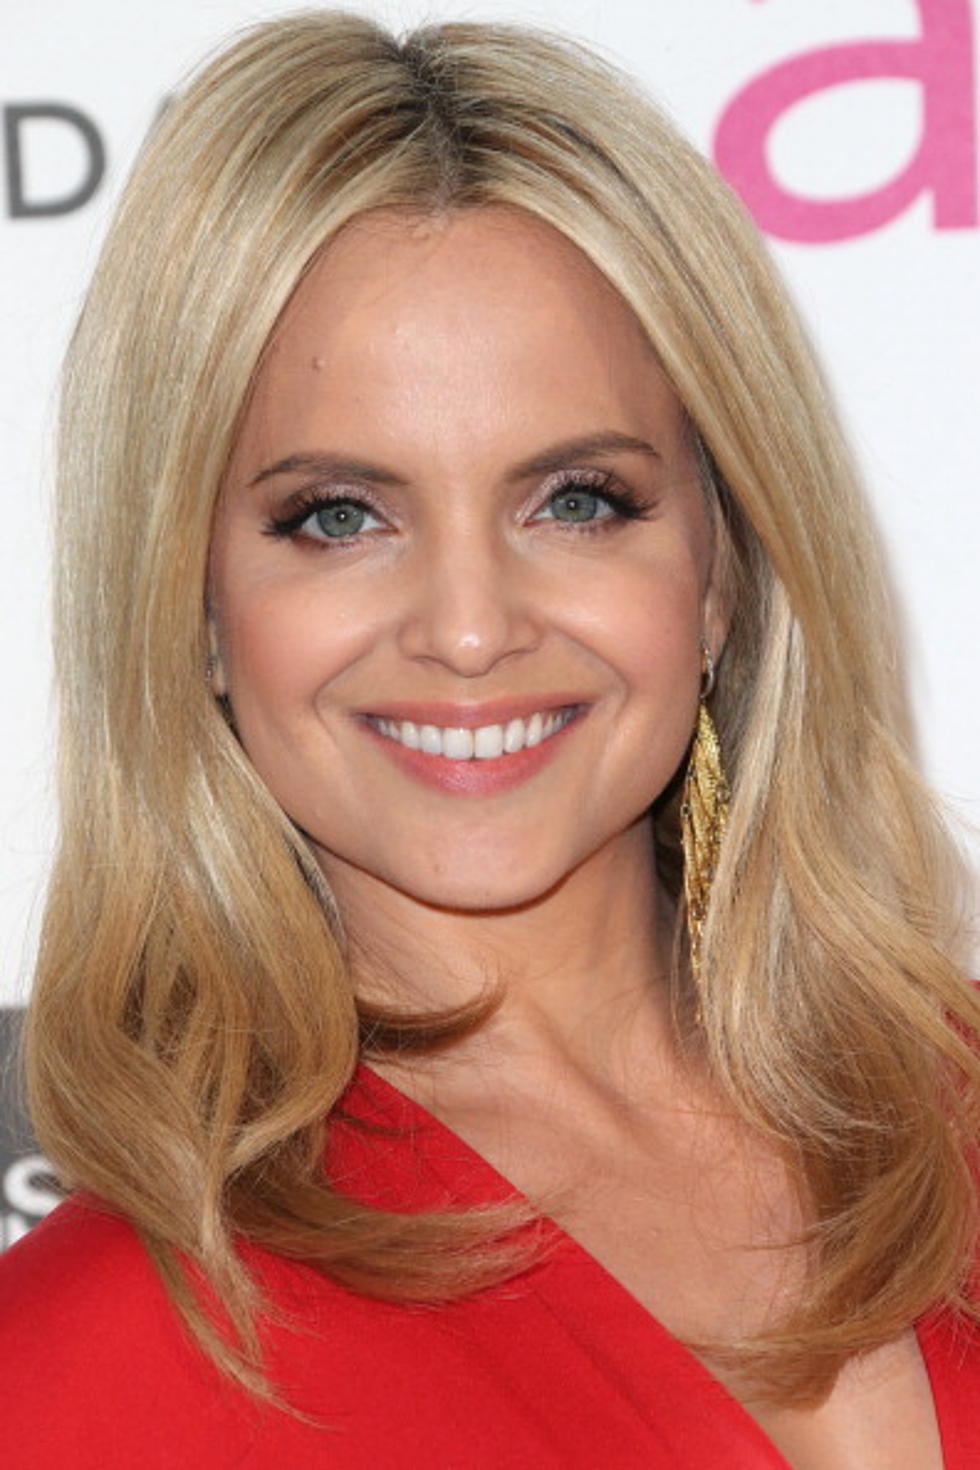 Does She Sound as Good As She Looks? Mena Suvari Guests with Dennis Miller